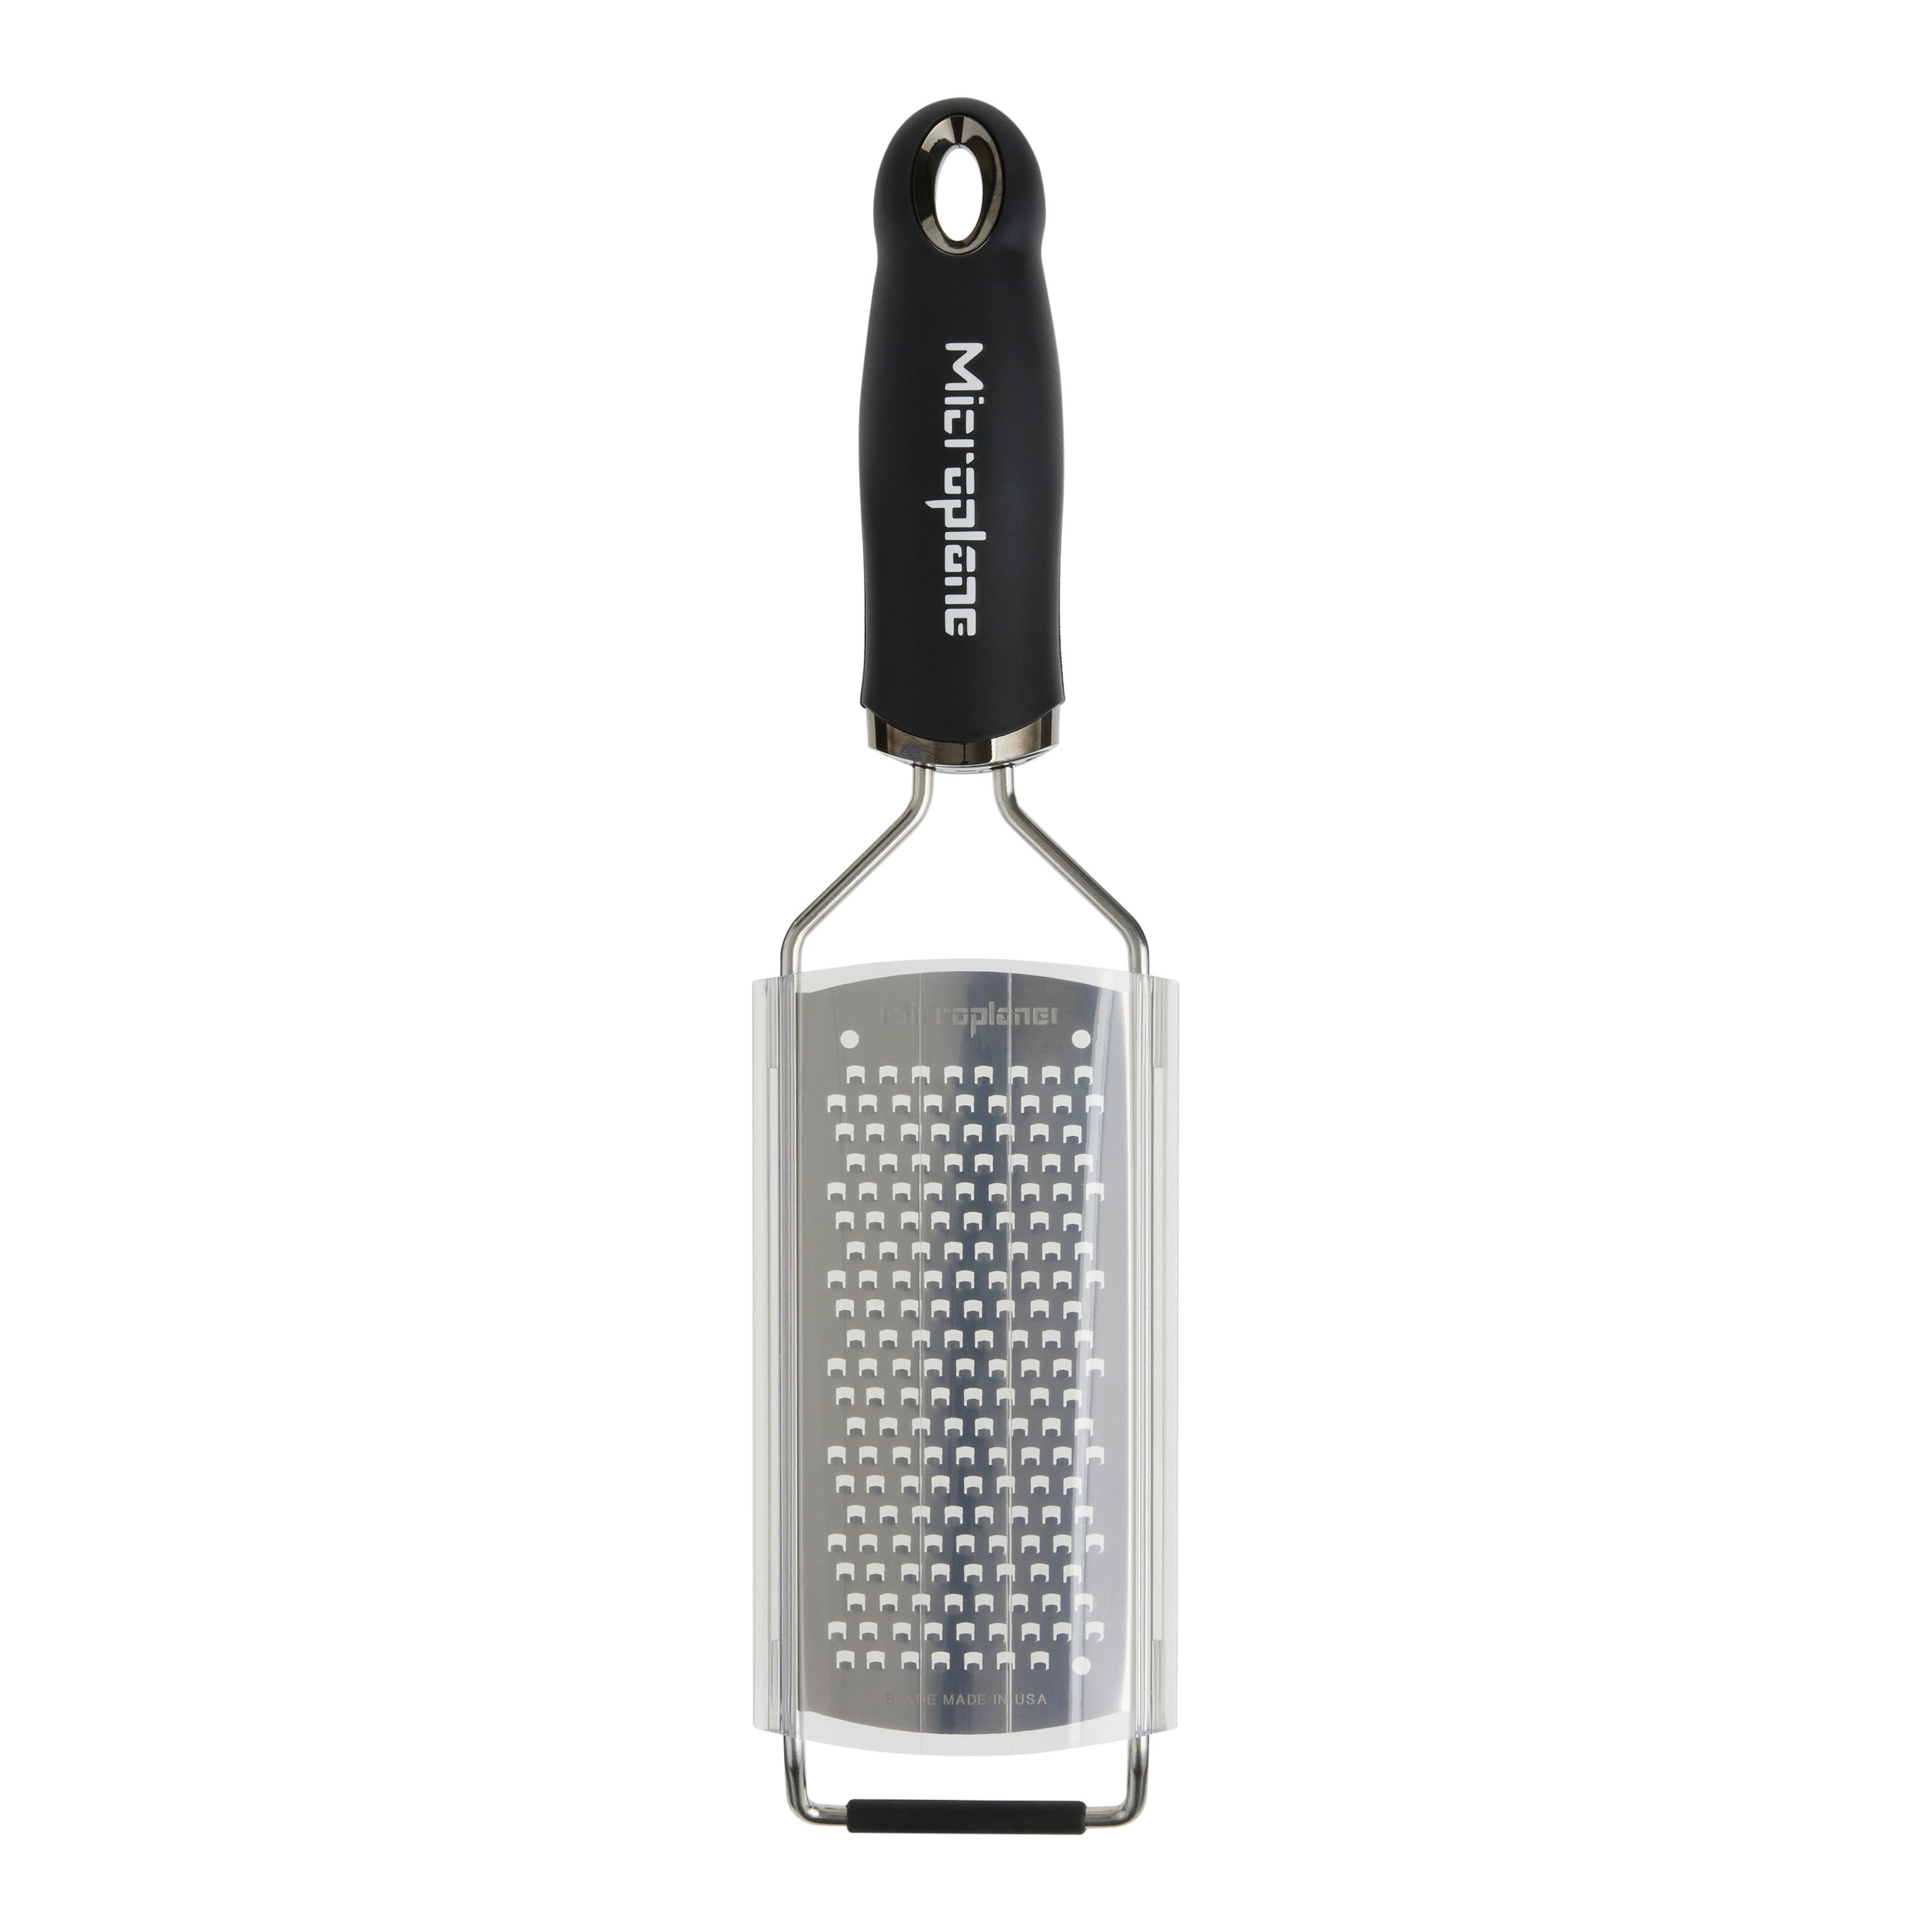 Microplane Fine Mixing Bowl Grater